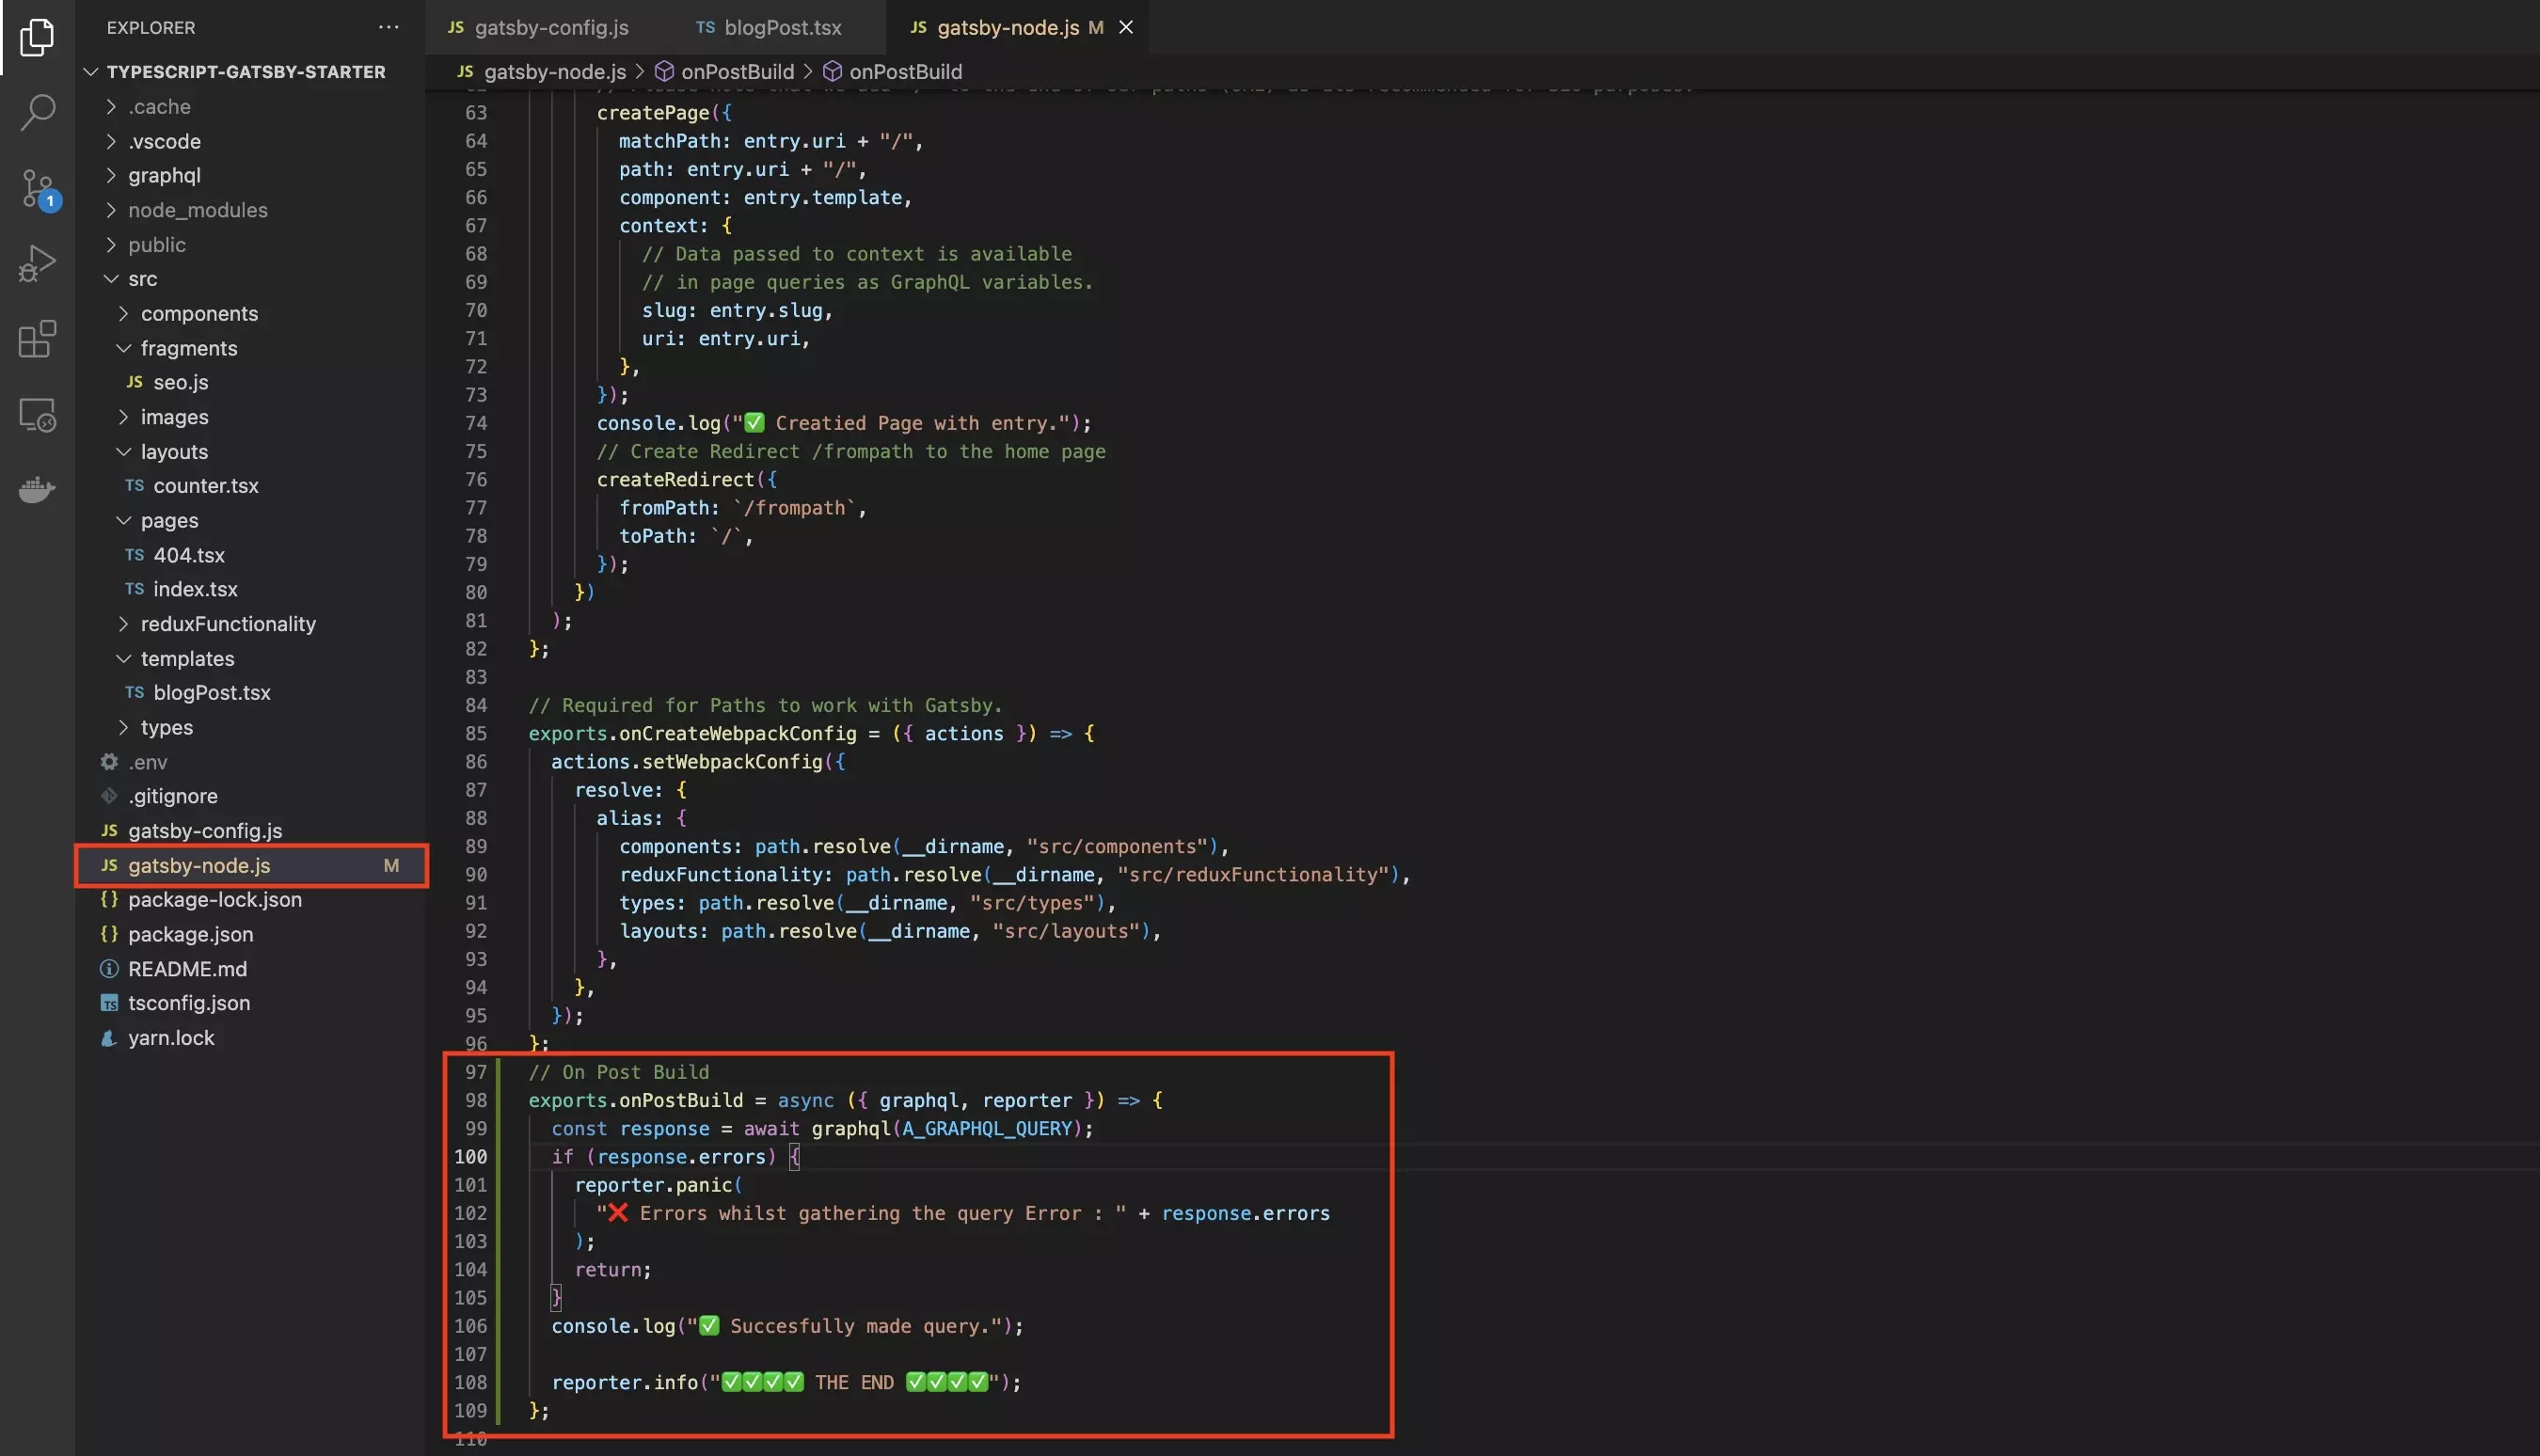 A screenshot of VSCode showing the Gatsby-node.js file selected and the script provided below at the bottom of the file.